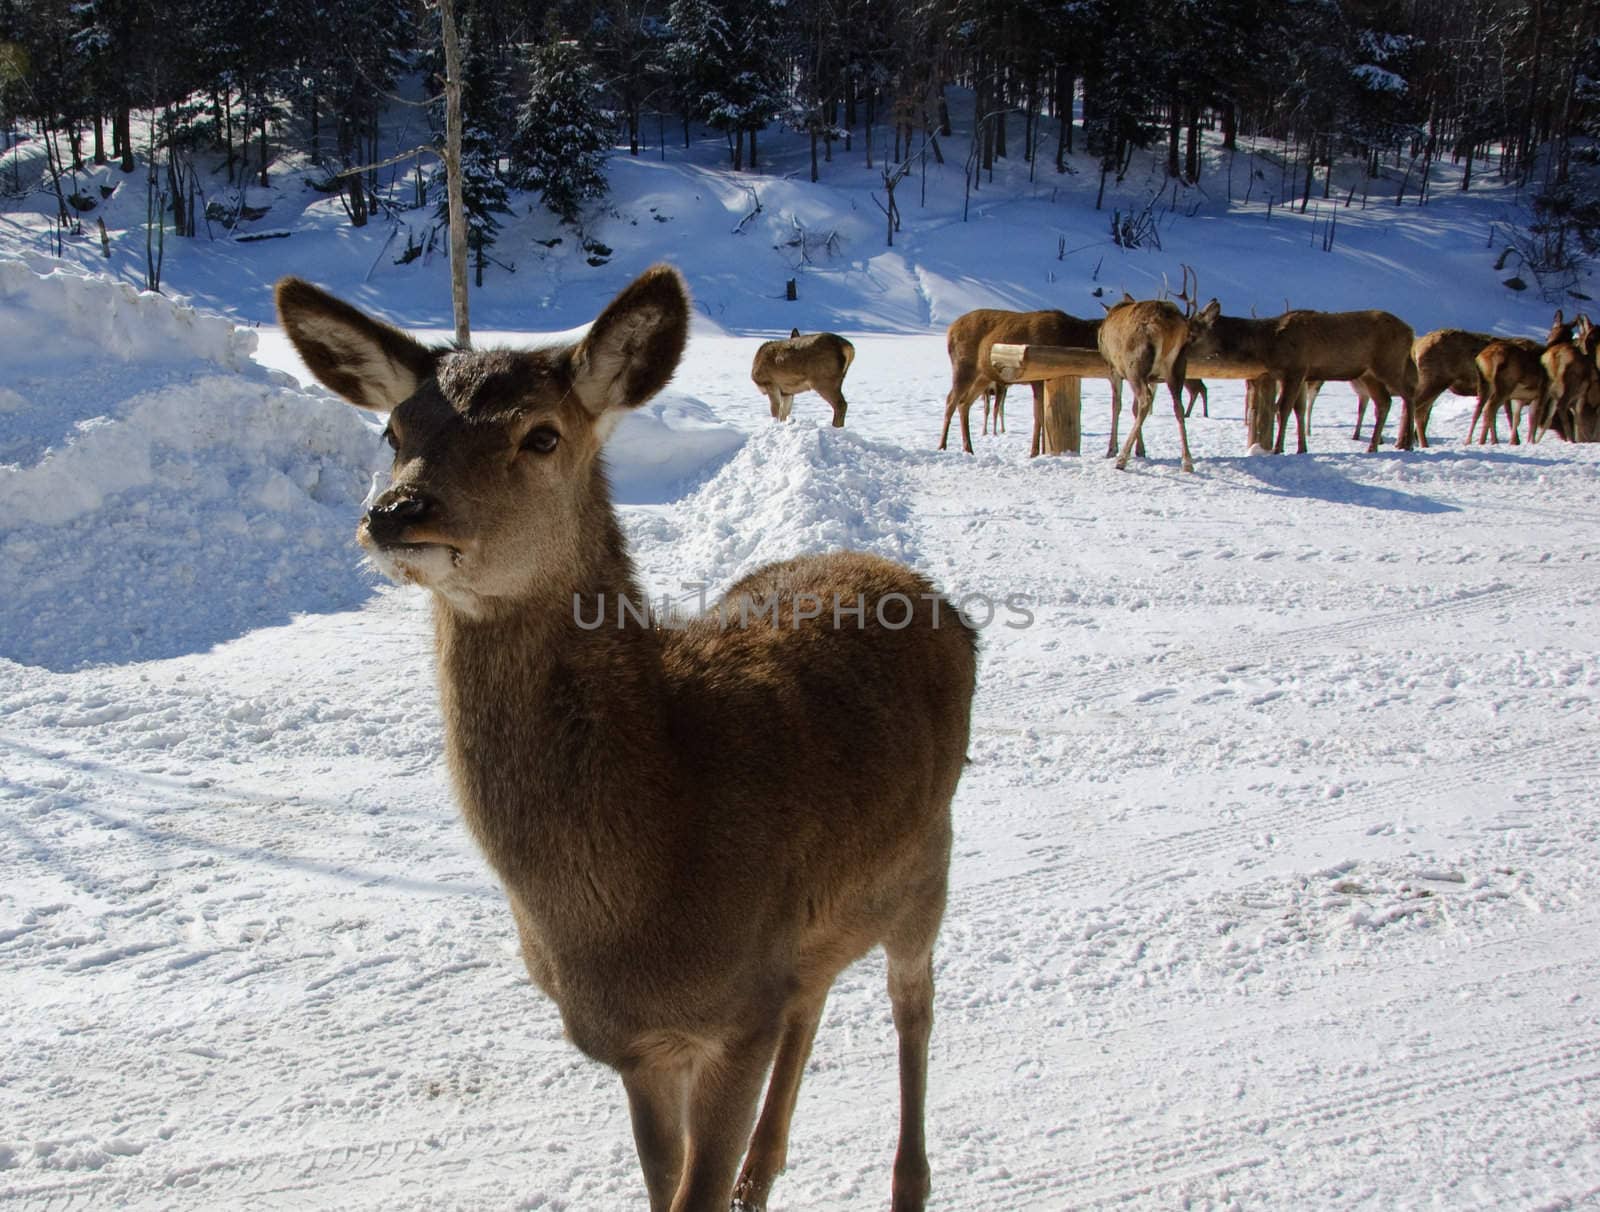 White-tailed deers in winter